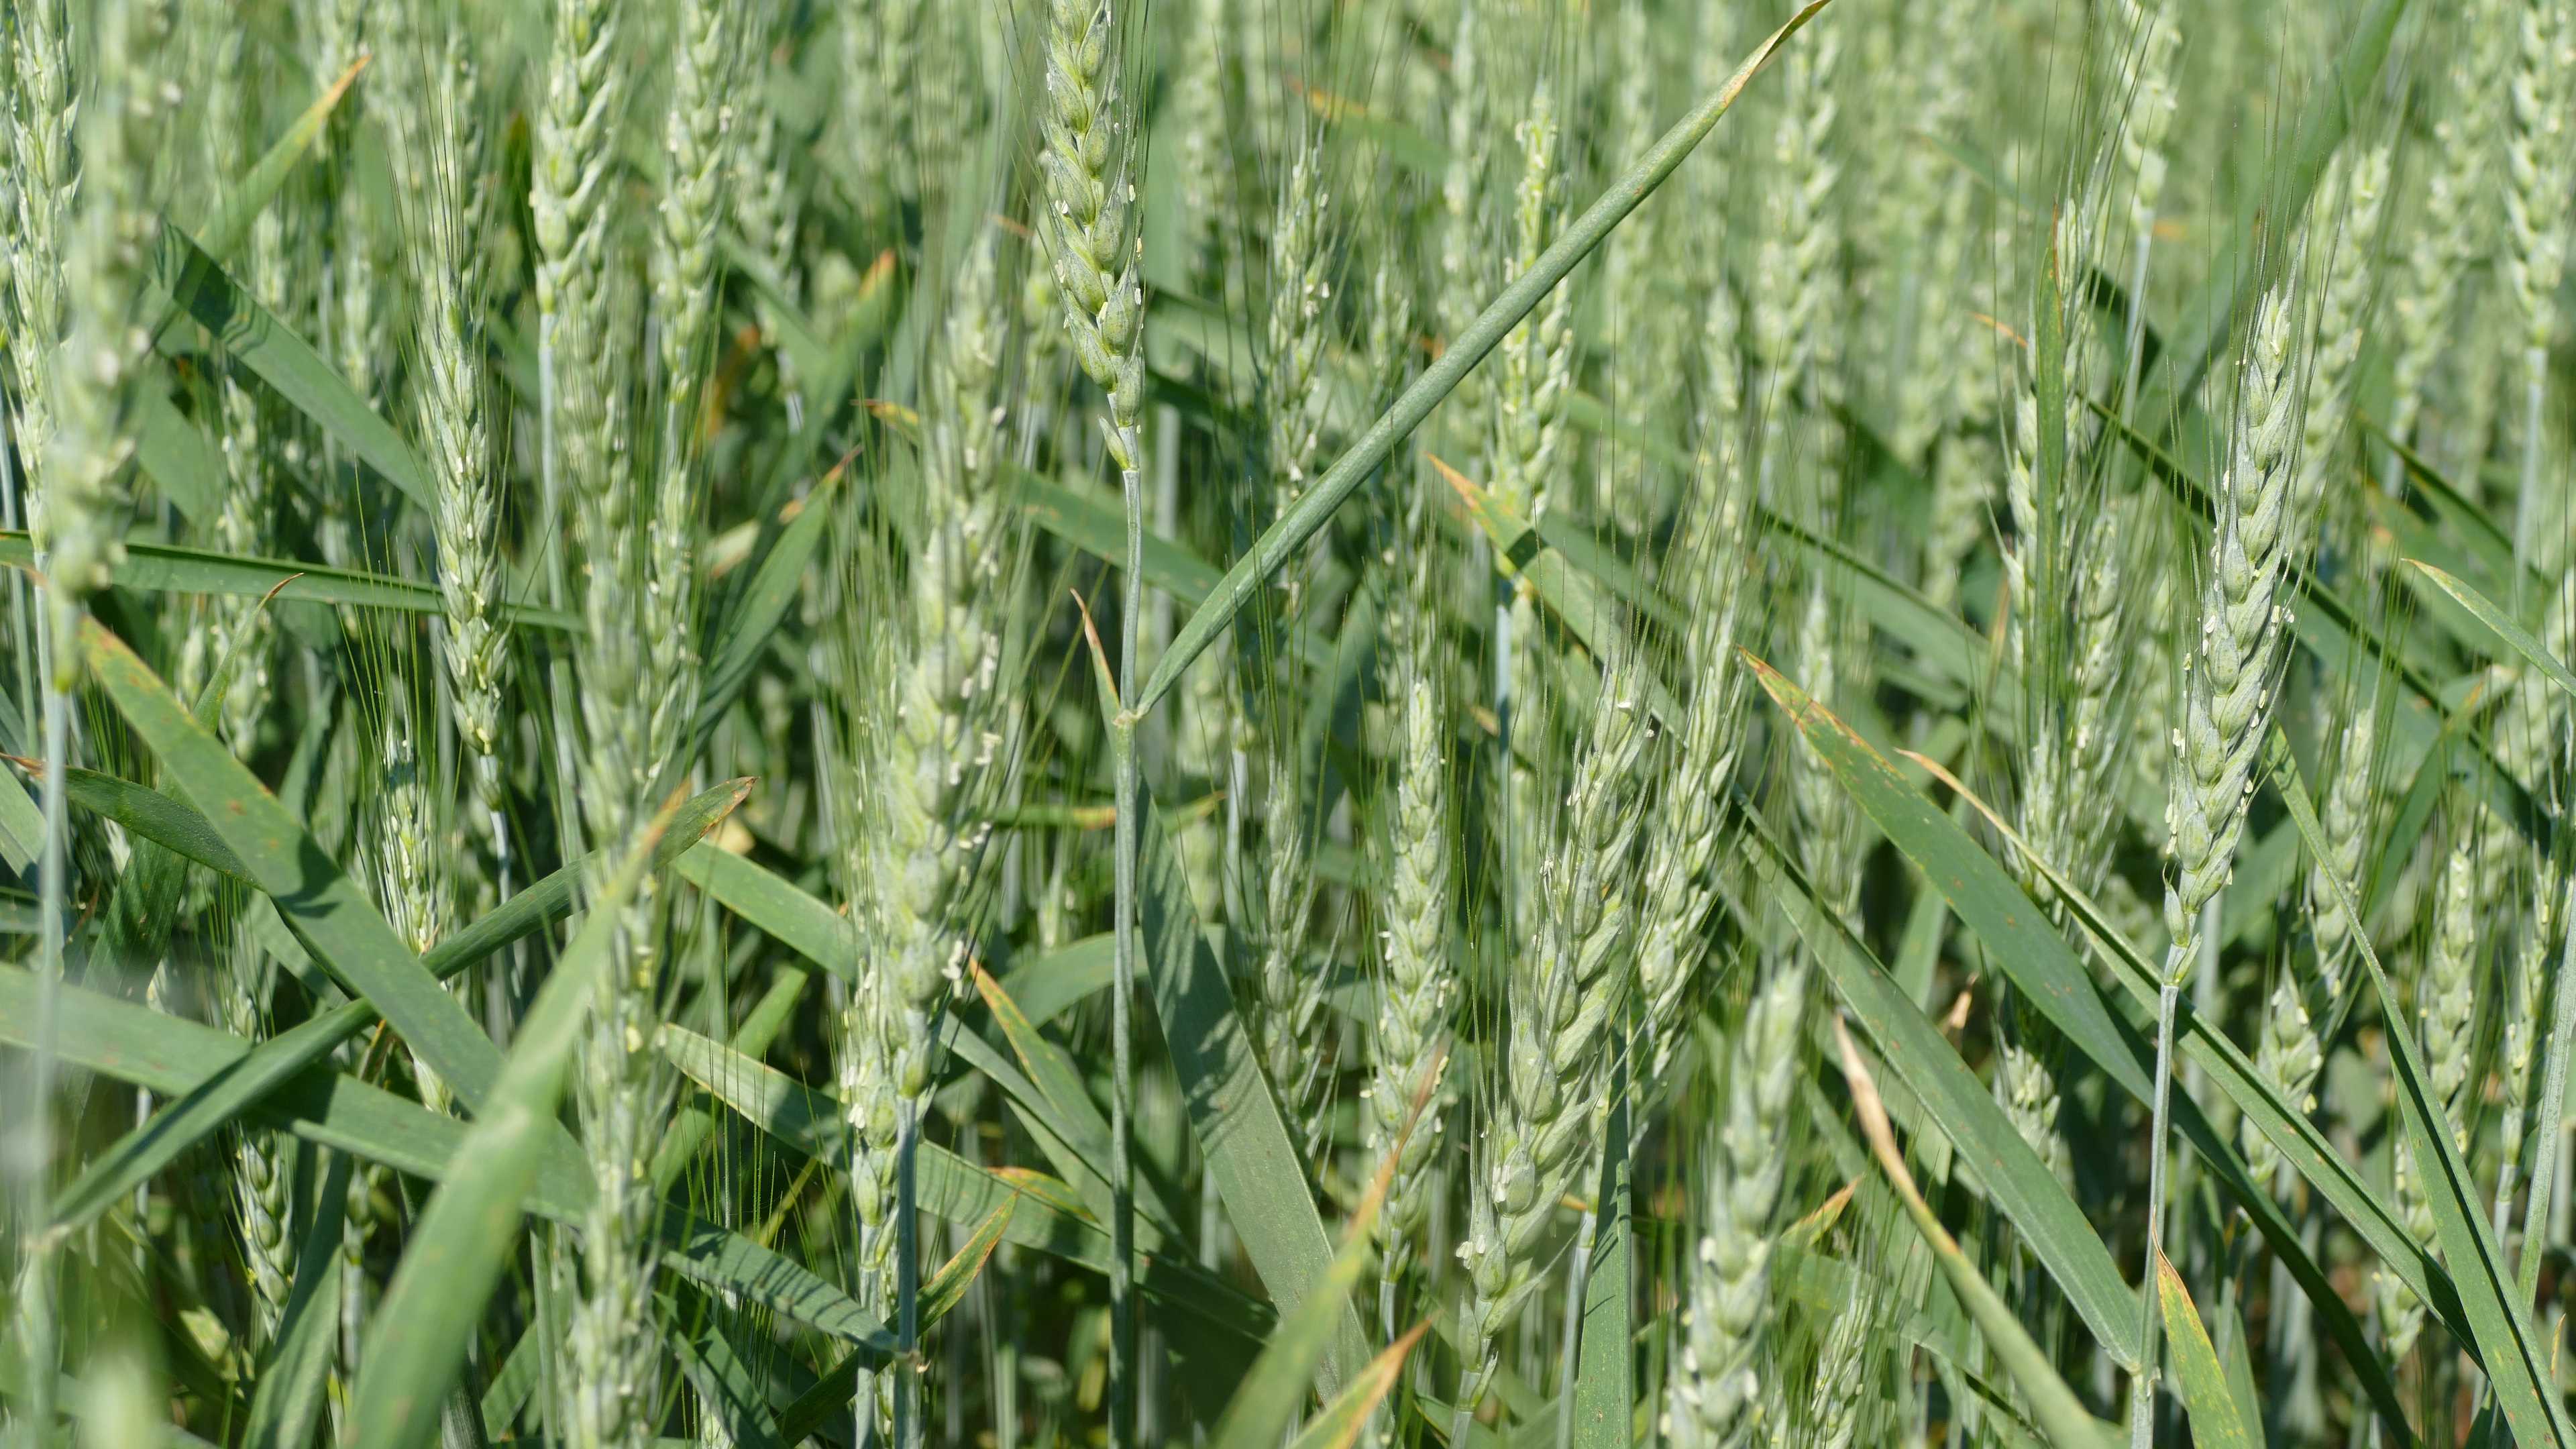 Wheat that is starting to flower.